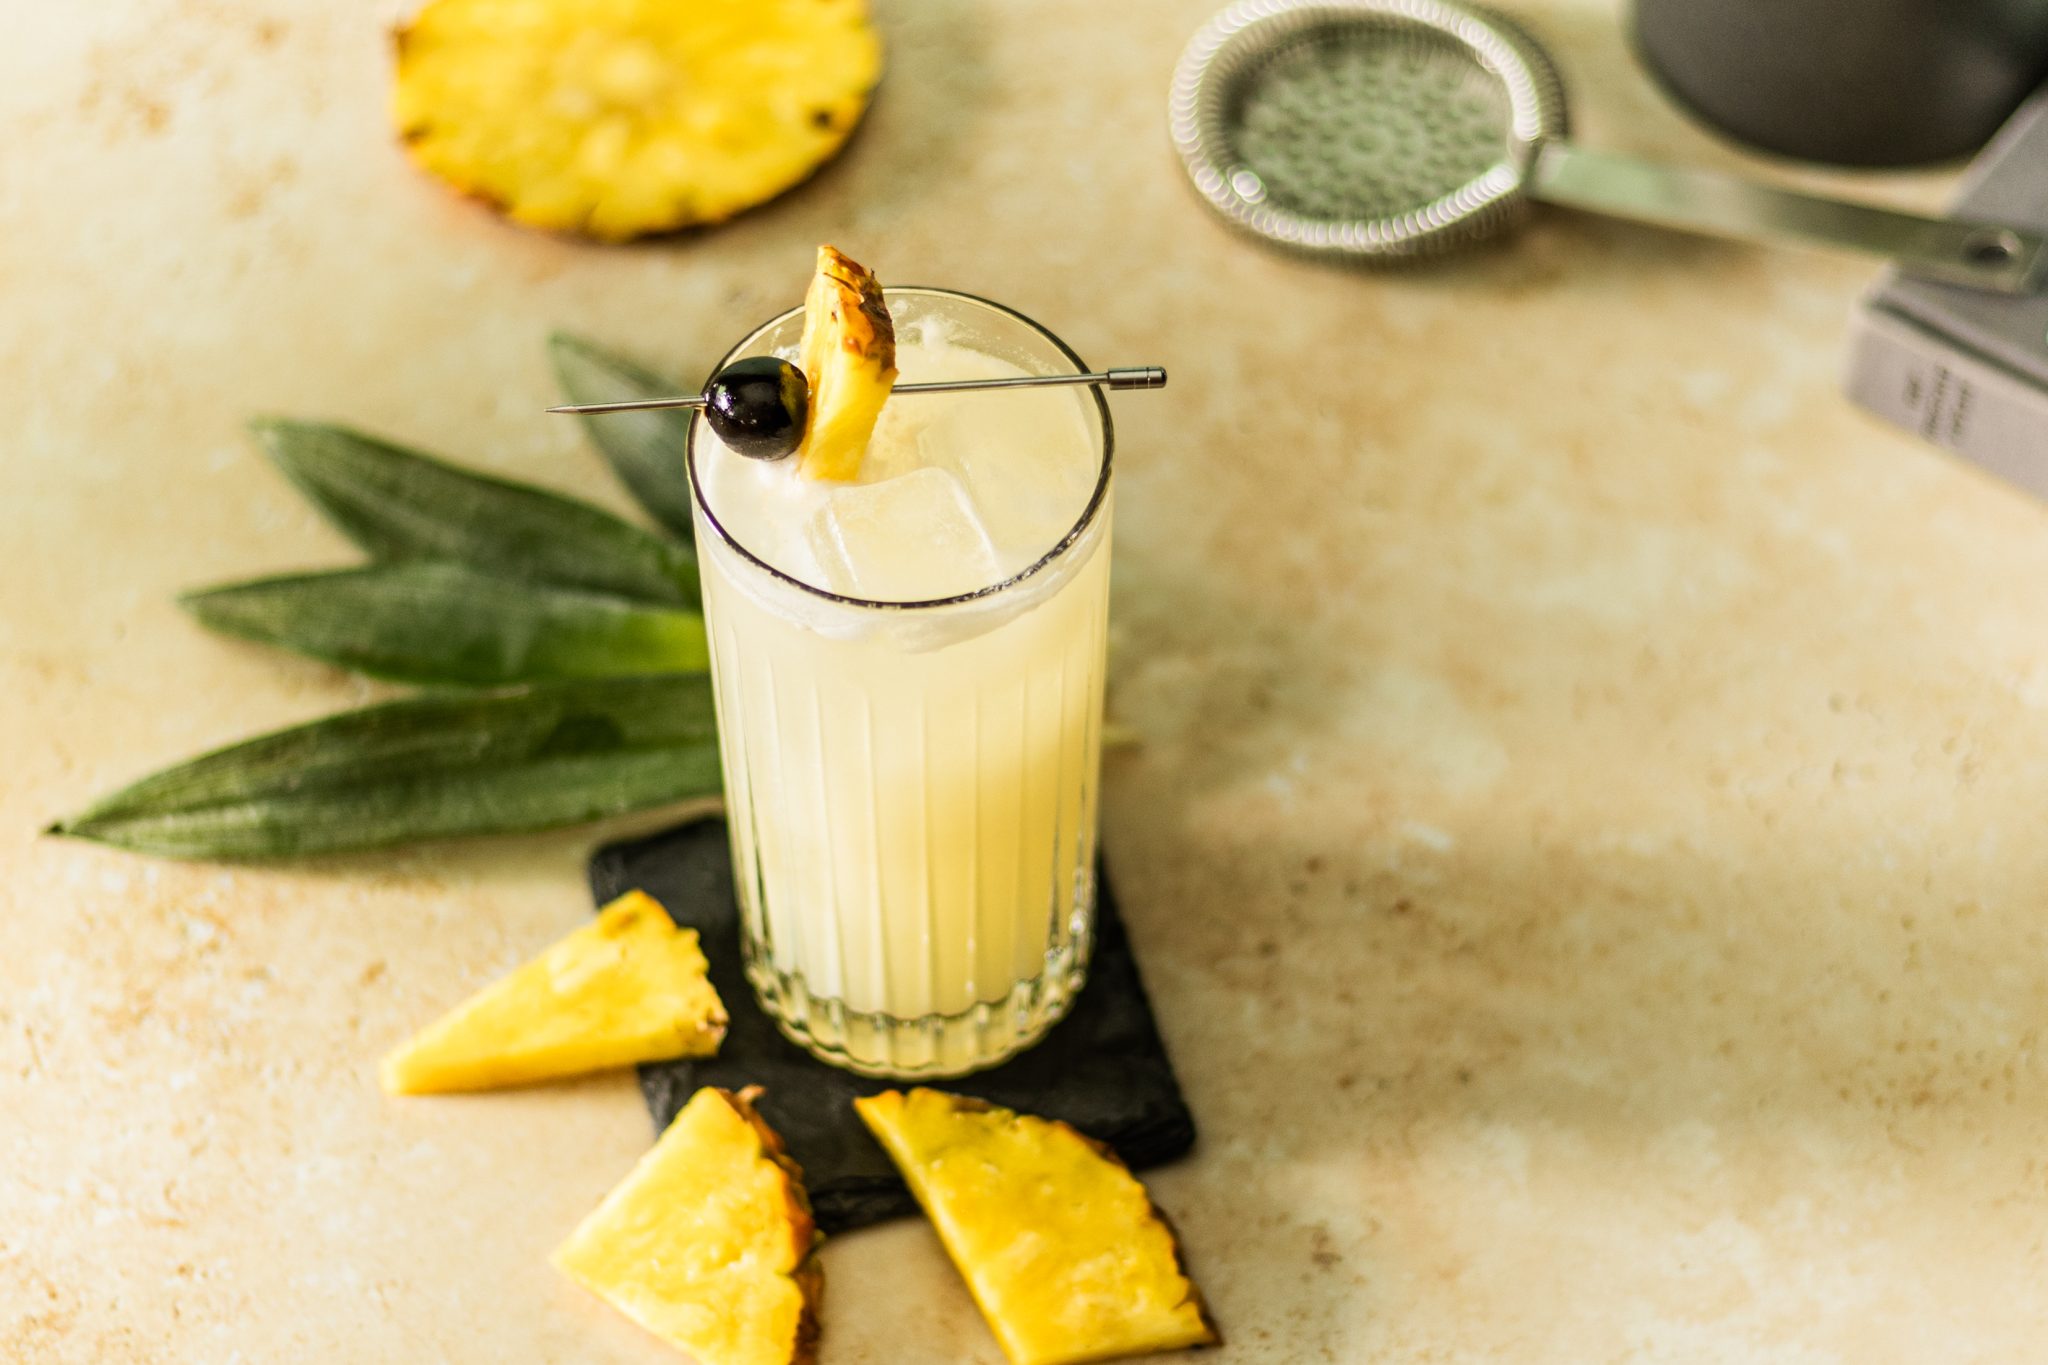 A Virgin Piña Colada Cocktail in highball glass on a black stone coaster placed on a beige table surrounded by three pineapple slices, a pineapple wheel, some plant leaves, and a strainer.